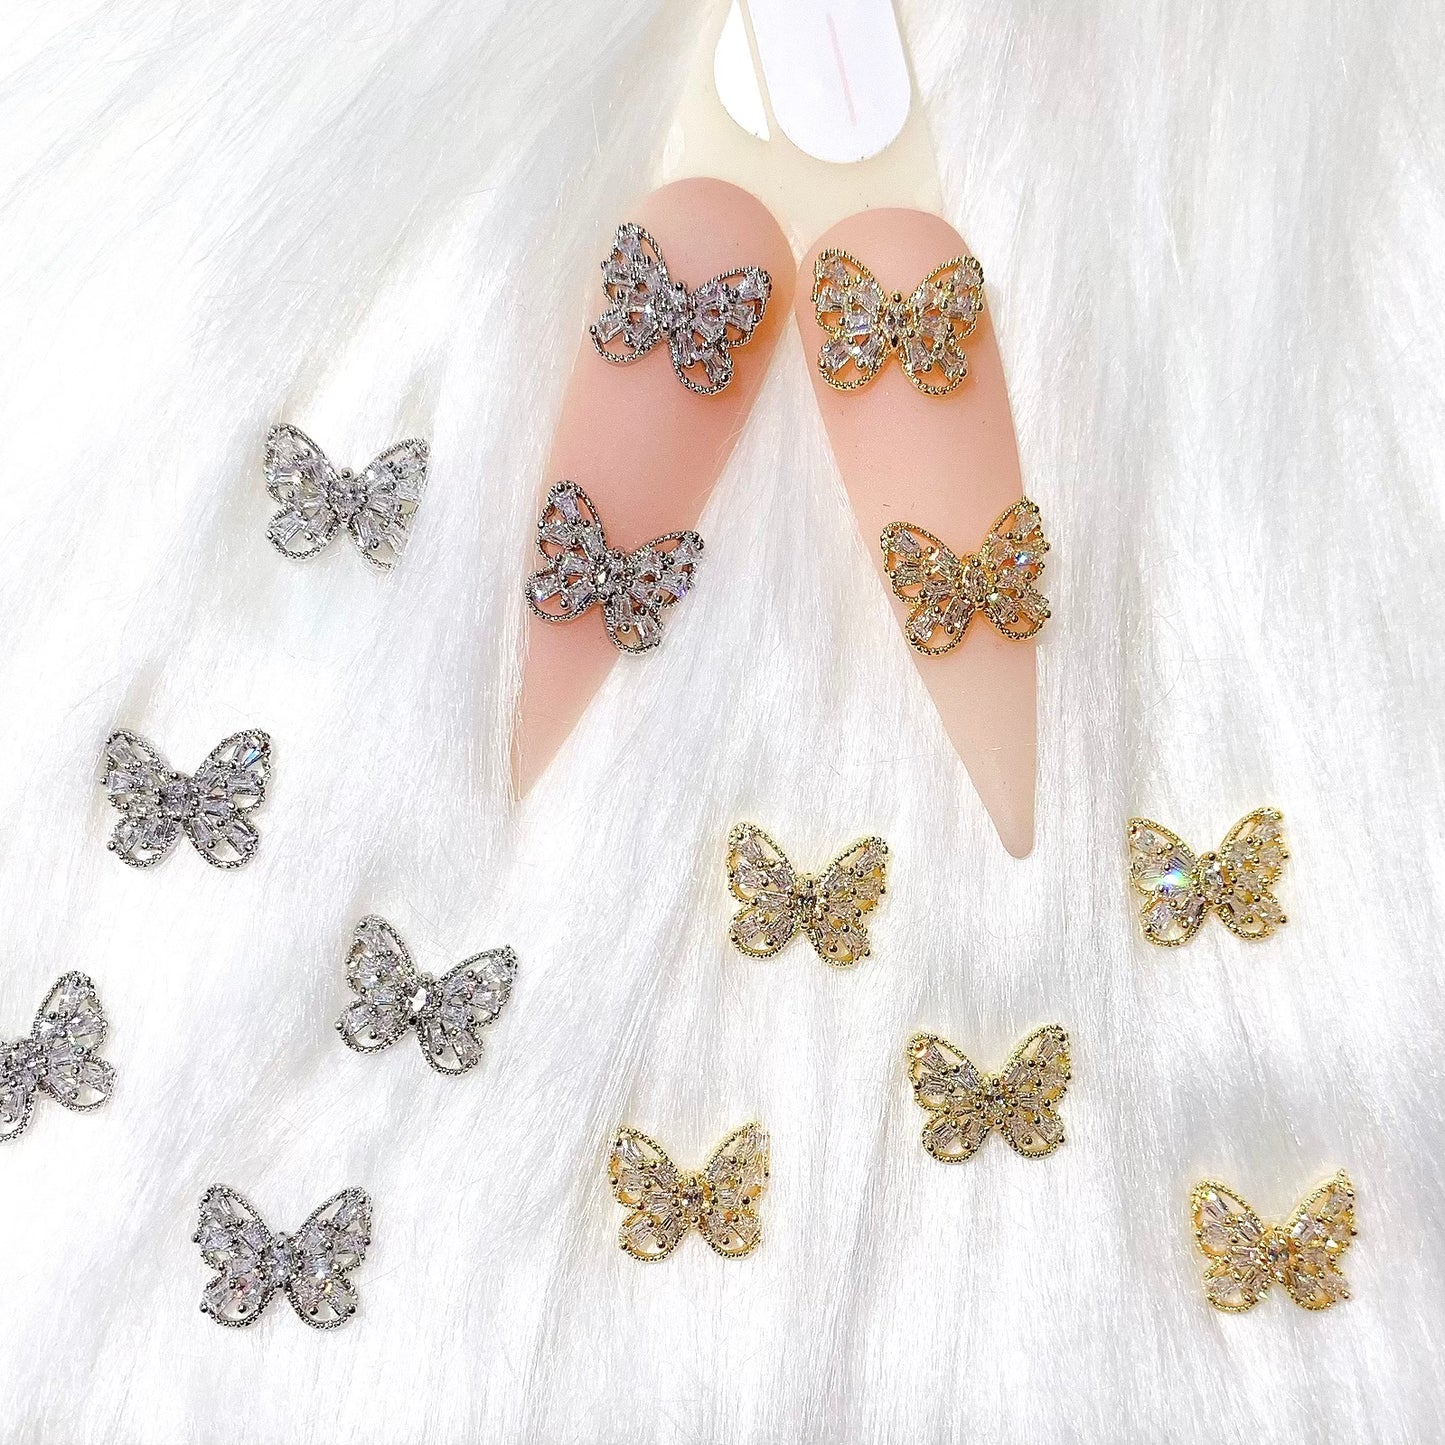 2 piece Butterfly Nail Charm - Metal Charm Nail Decorations